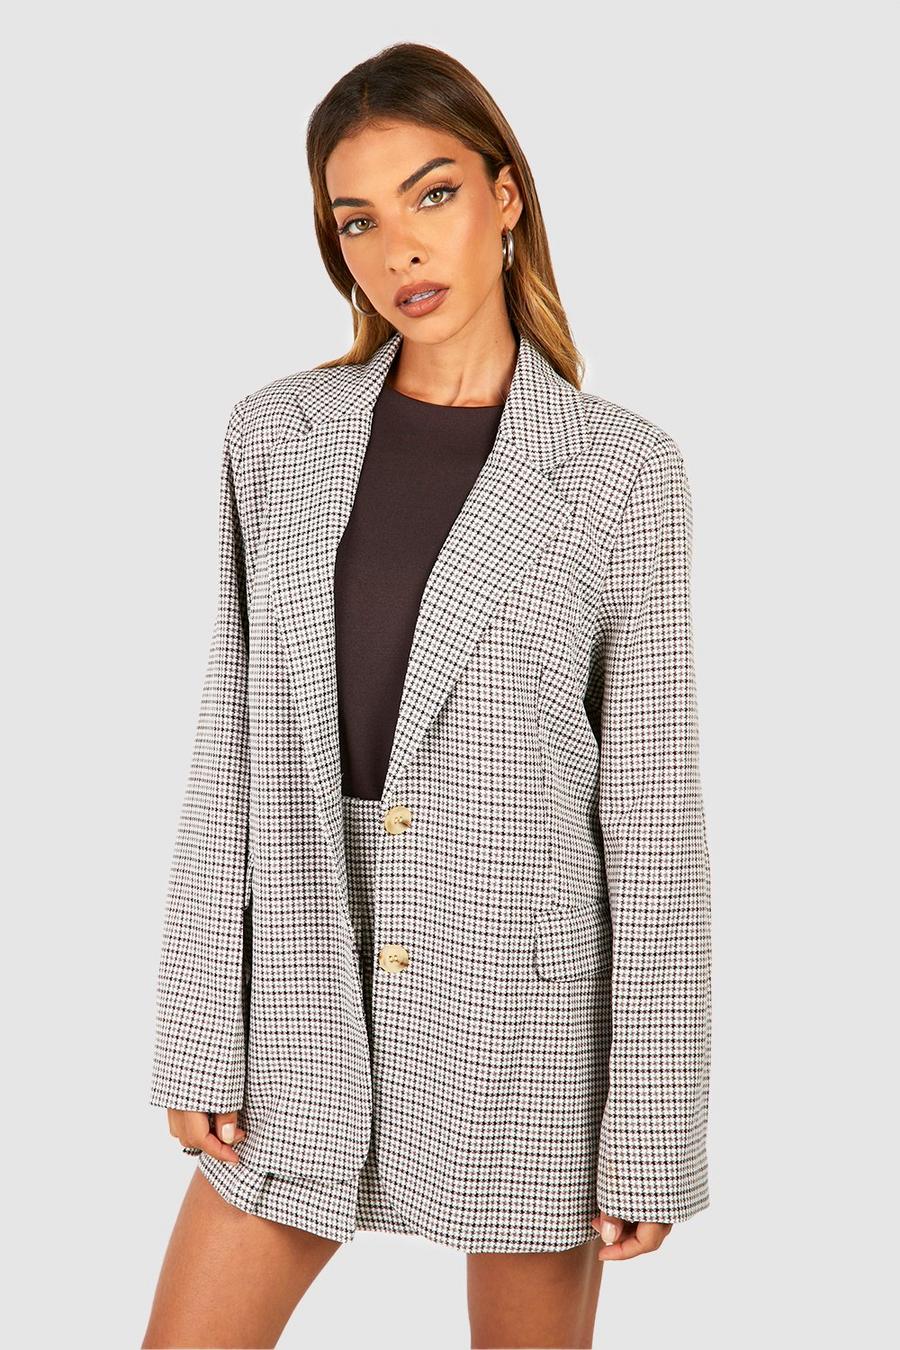 Chocolate Tonal Textured Check Relaxed Fit Blazer